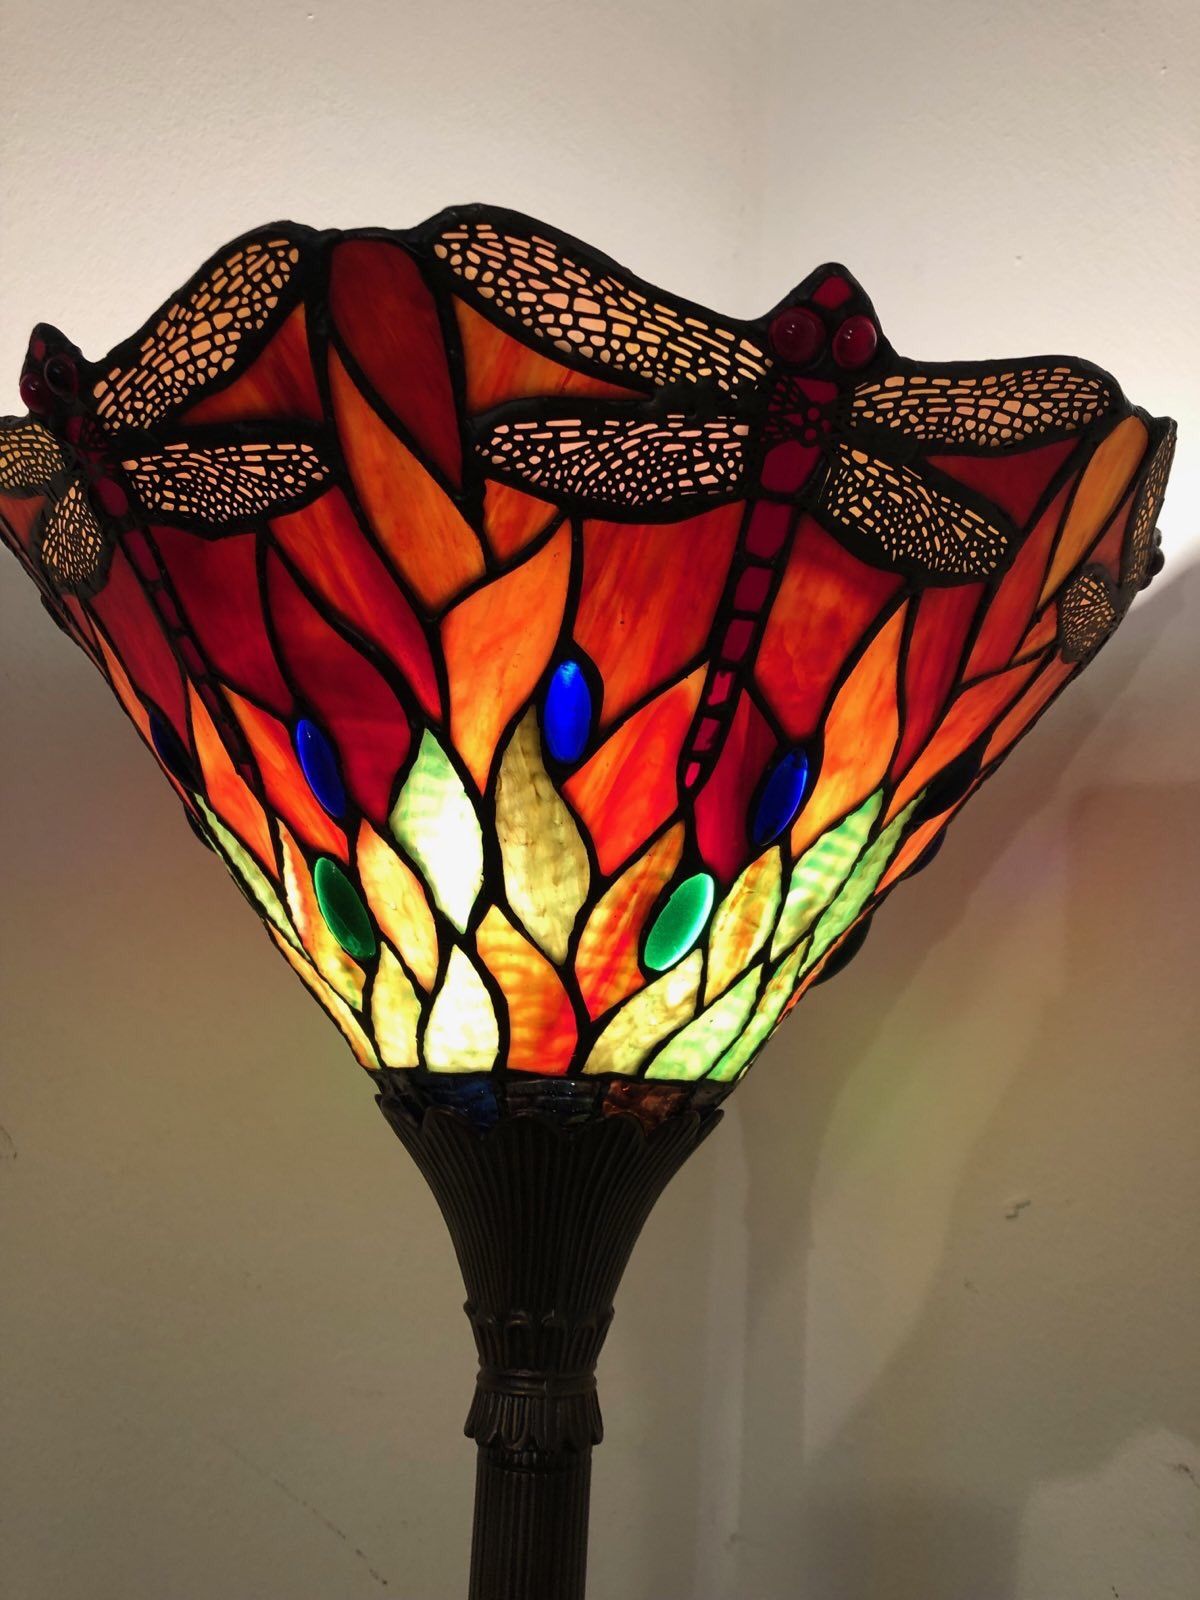 Tiffany stain glass vintage floor lamp